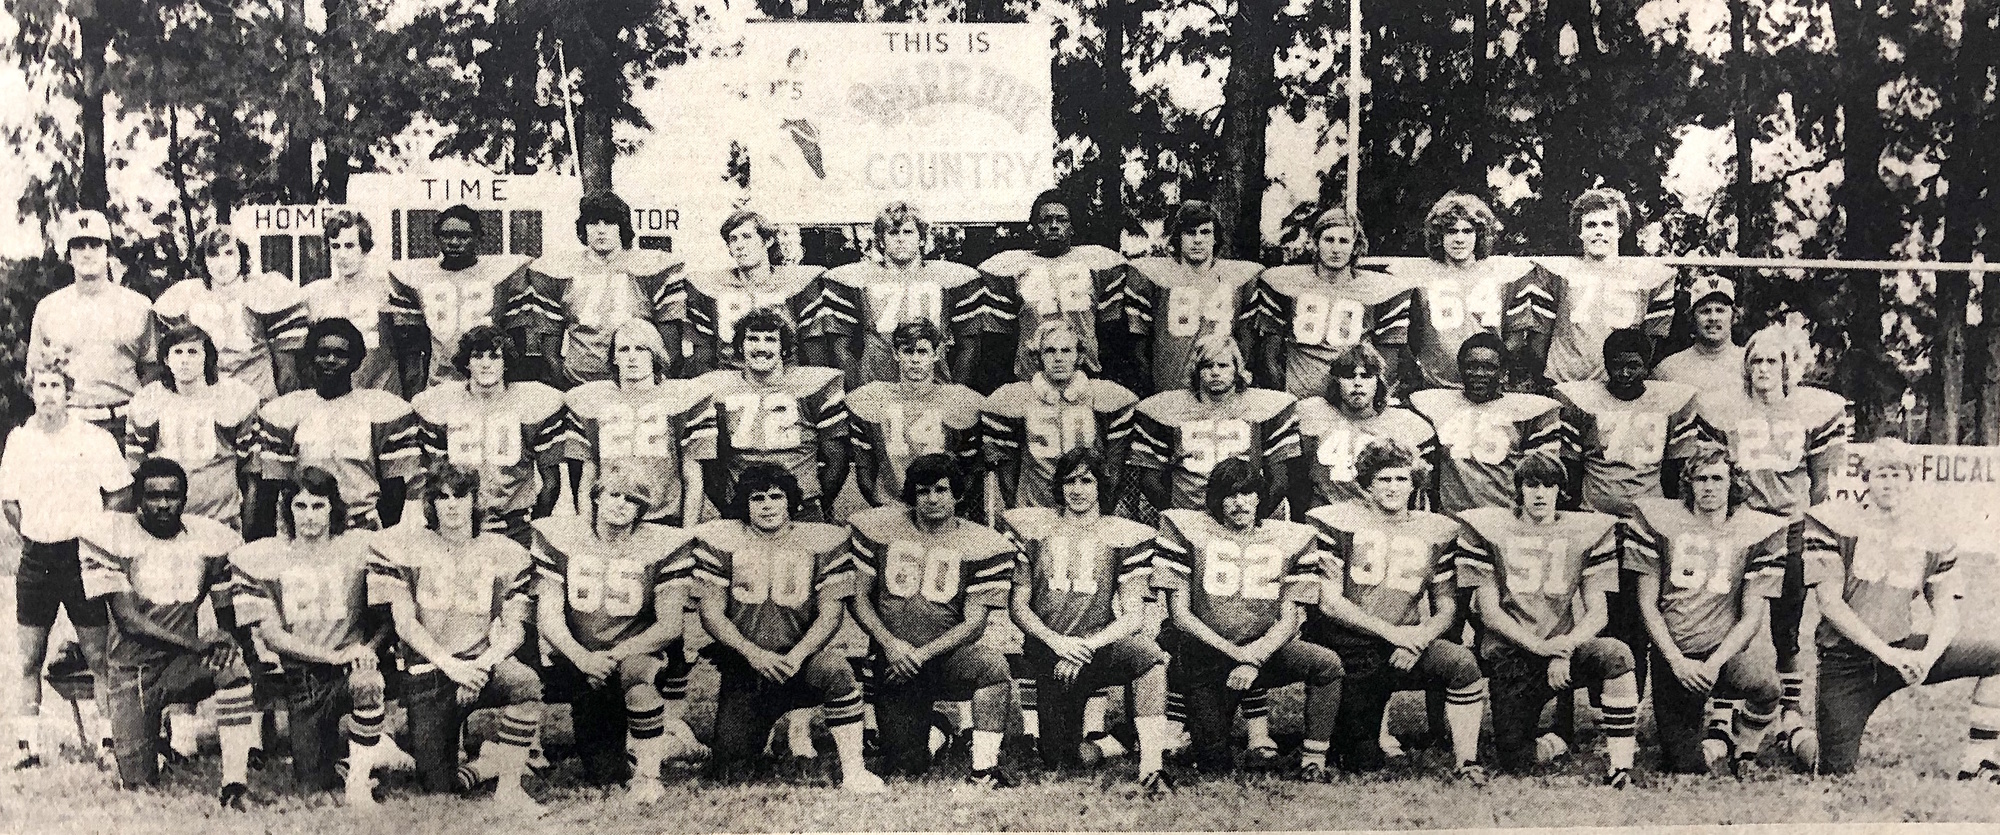 The first West Orange Warrior football team boasted an 8-3 season and won the Orange Belt Conference in 1975-76.